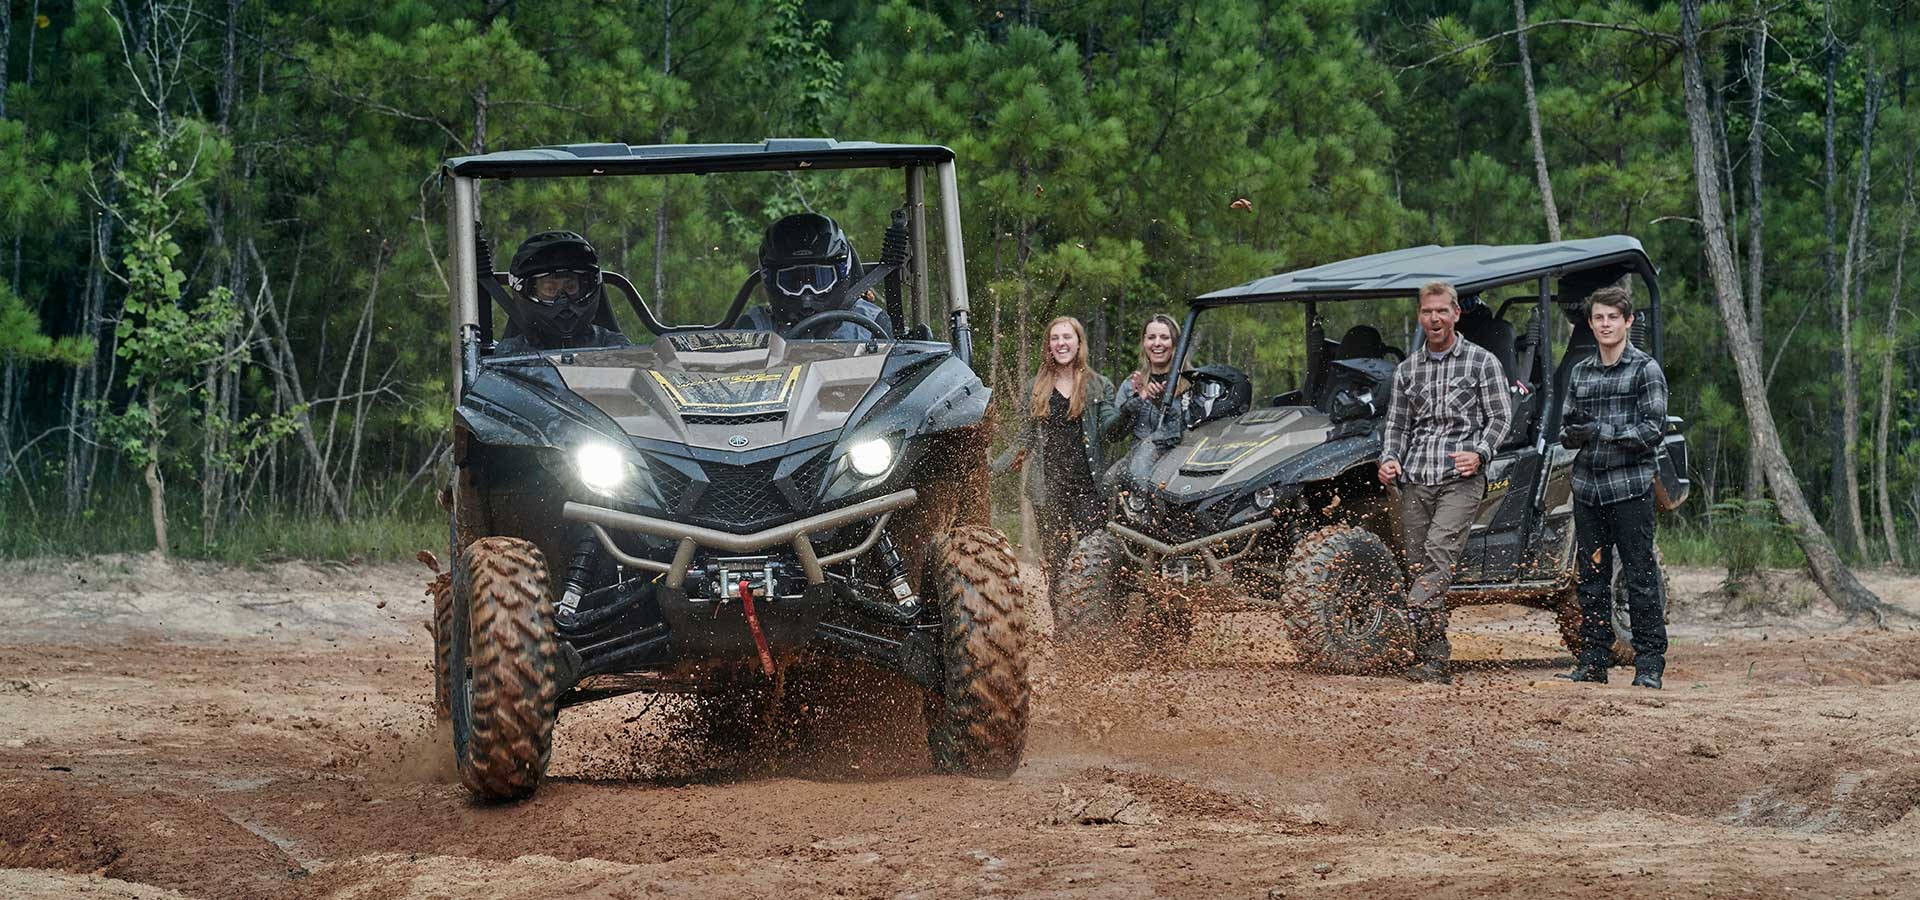 5 Ways to Find New ATV & Side-by-Side Trails